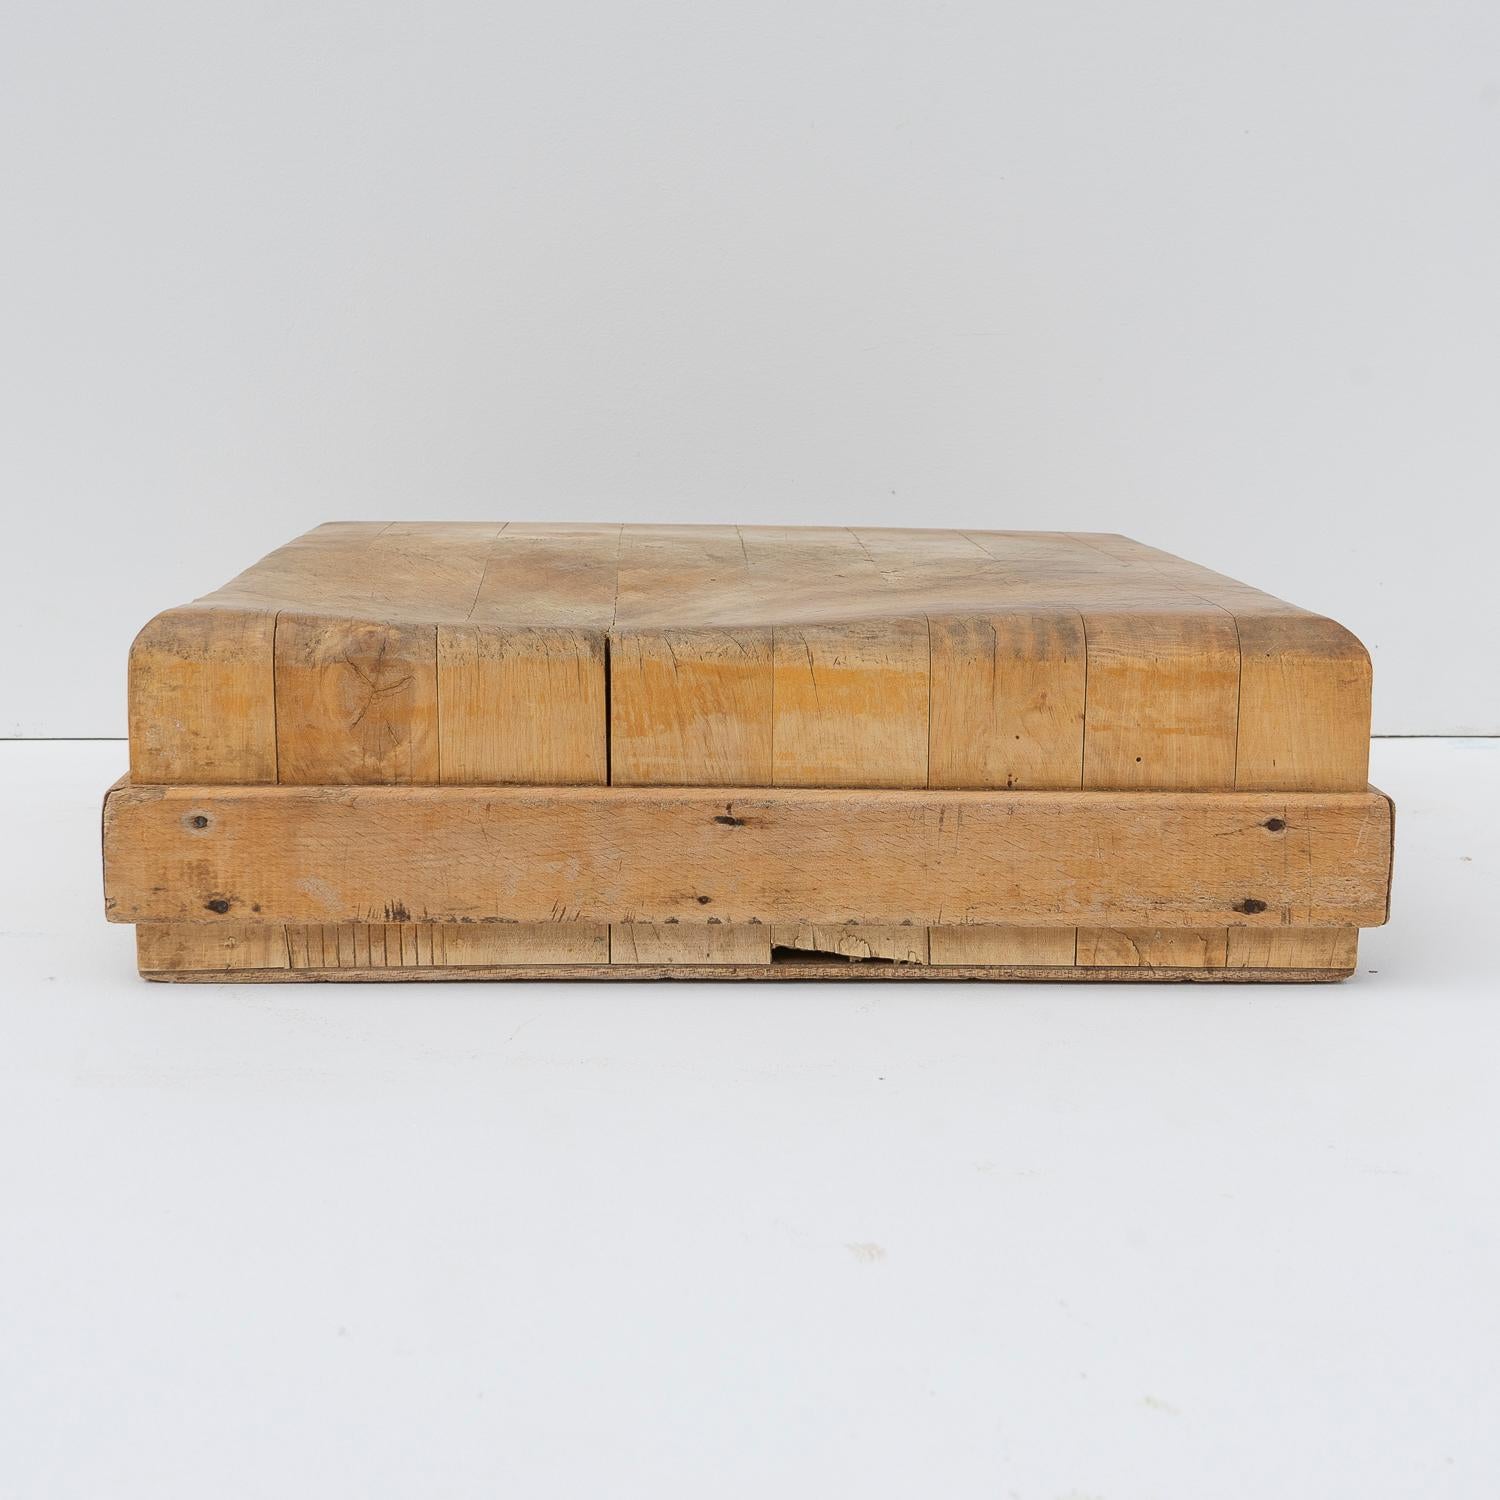 Hand-Crafted Vintage Wooden End Grain Butchers Block Chopping Board, Early-Mid 20th Century